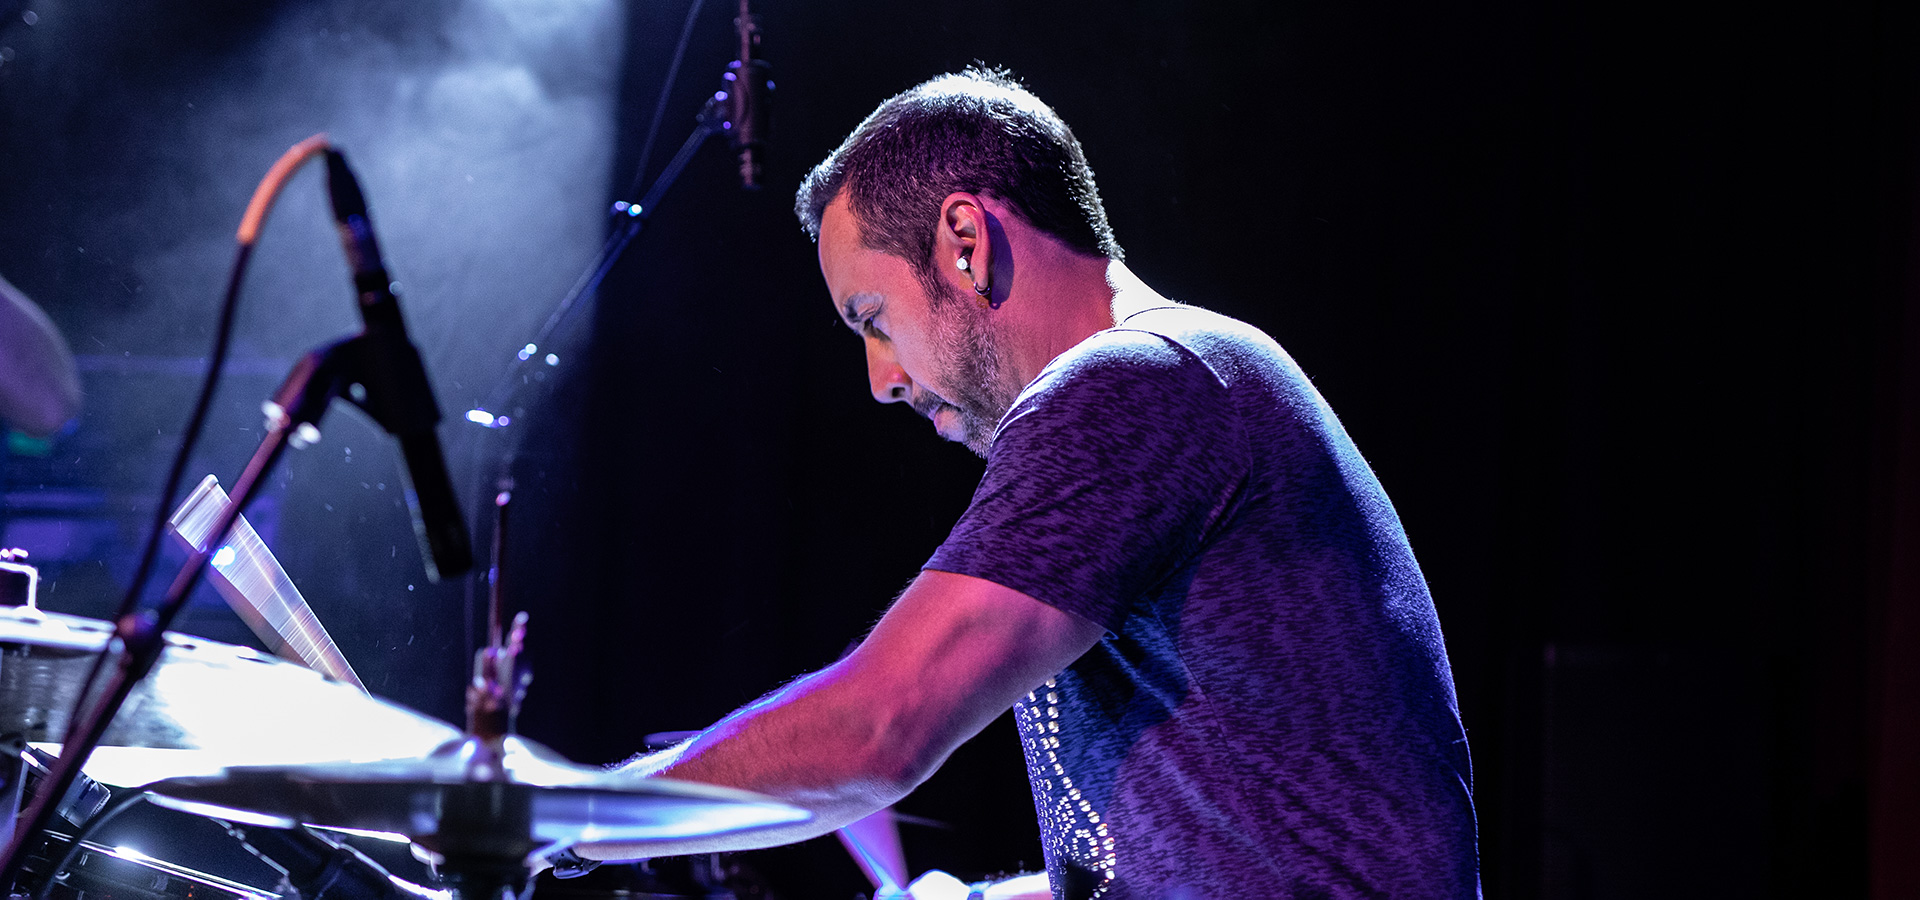 Antonio Sanchez plays the drums on a hazy stage with pink-toned lights amidst his performance of Birdman Live.